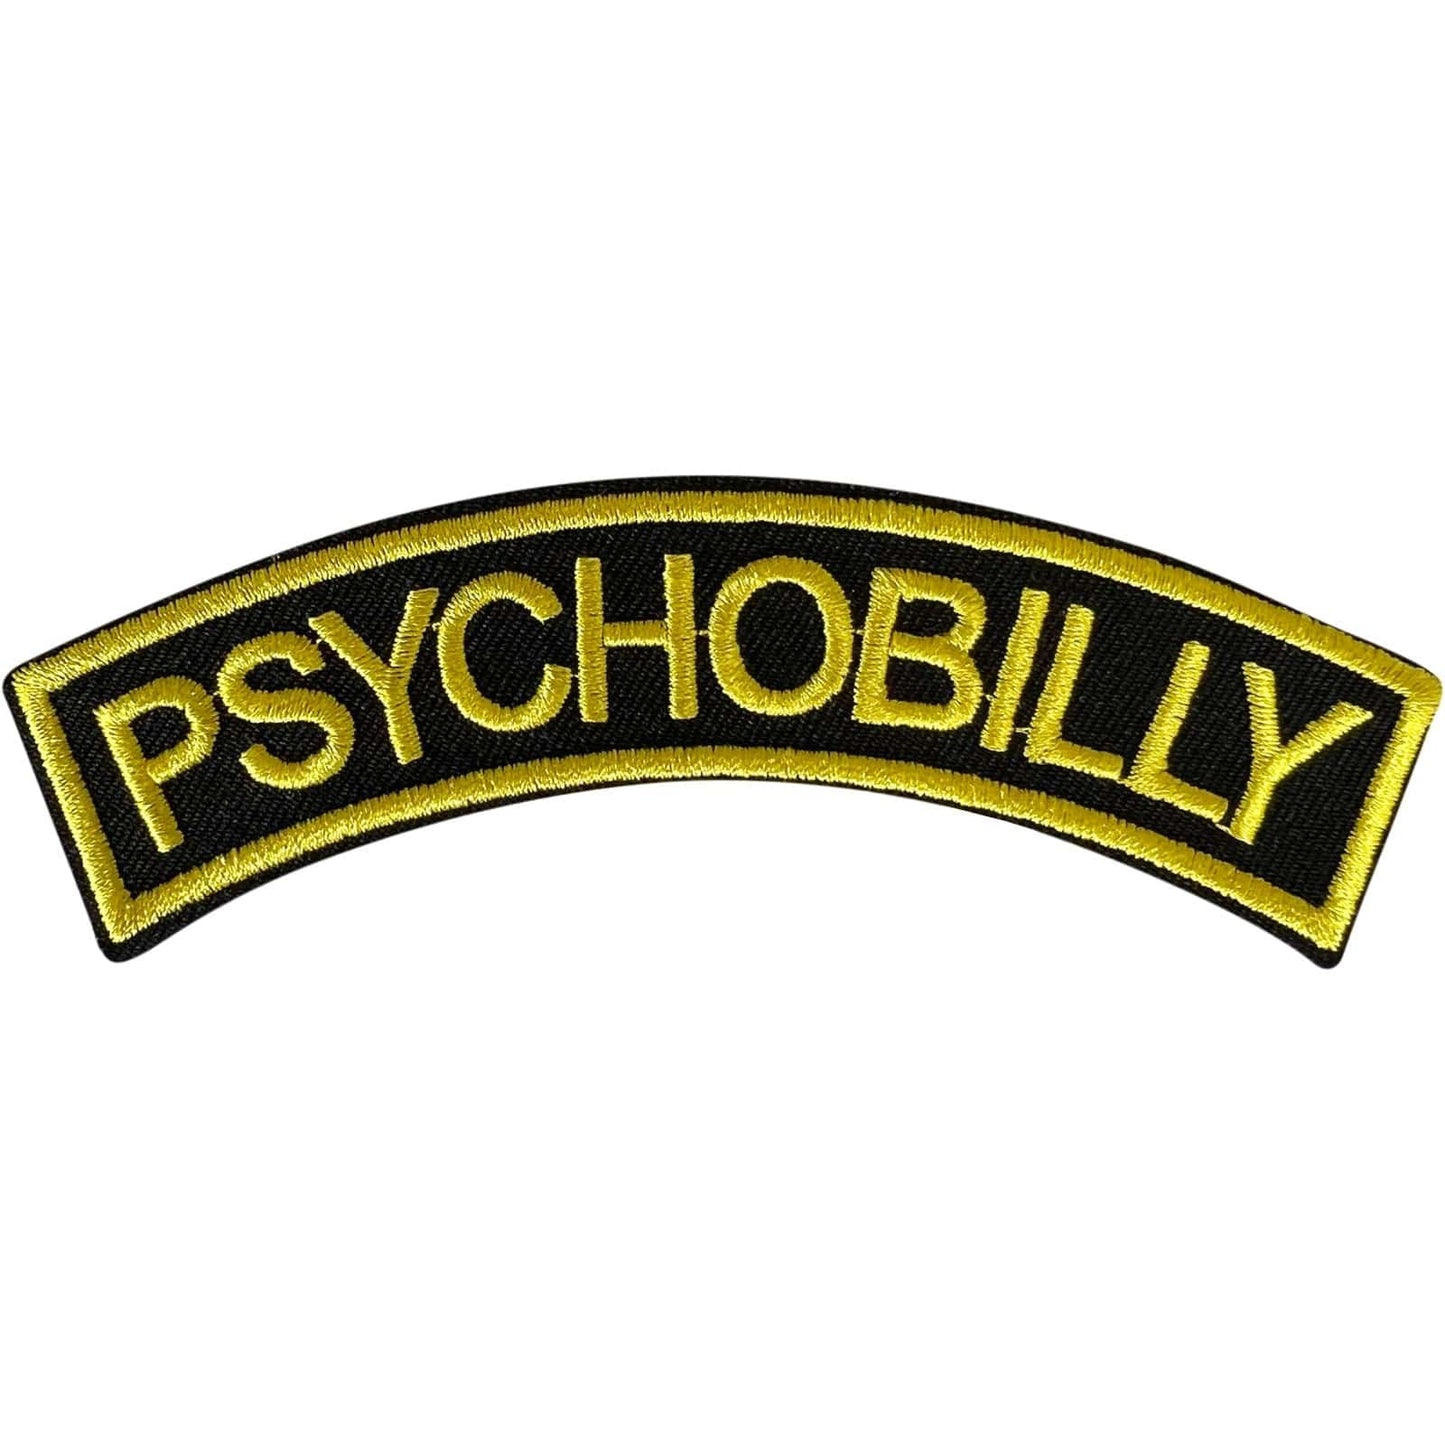 Psychobilly Patch Iron Sew On Clothes Bag Rockabilly Punk Rock Embroidered Badge